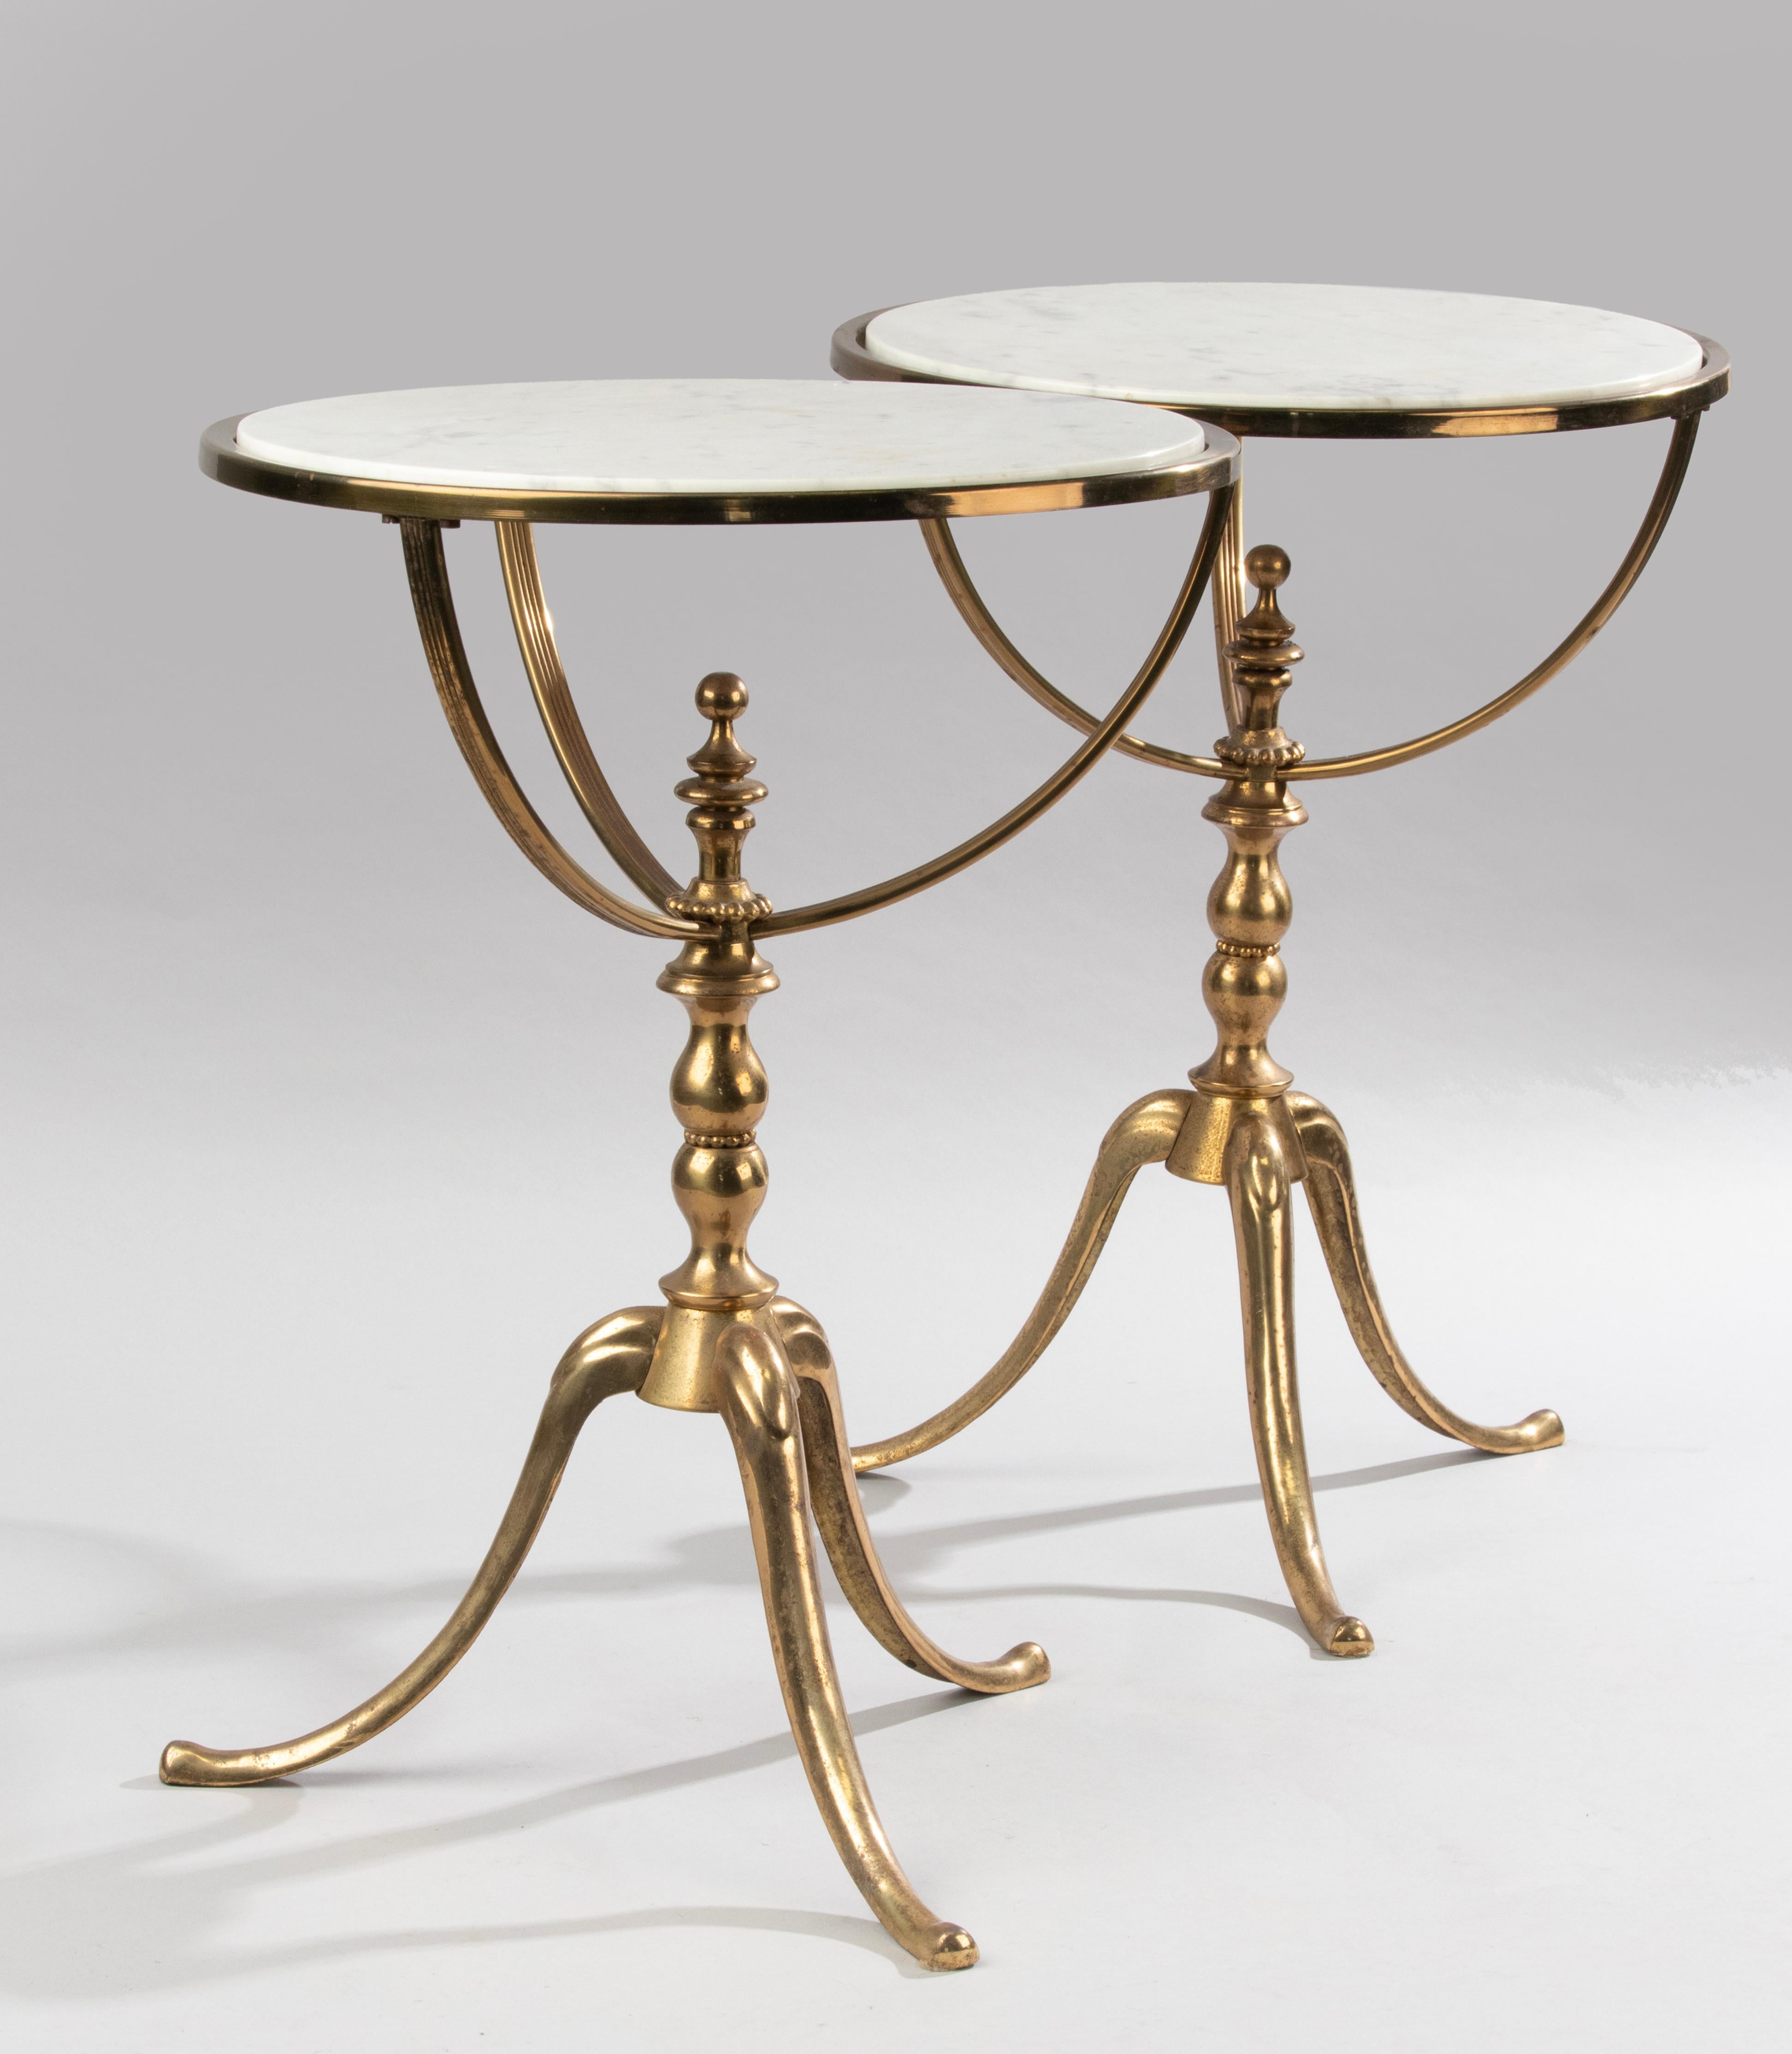 A pair of mid 20th century side tables with a tripod base. The base is made of brass colored metal. On top a Carrara marble base. 
Both tables are in good condition with minor signs of use. 
Little stains on the marble and some wear on the brass